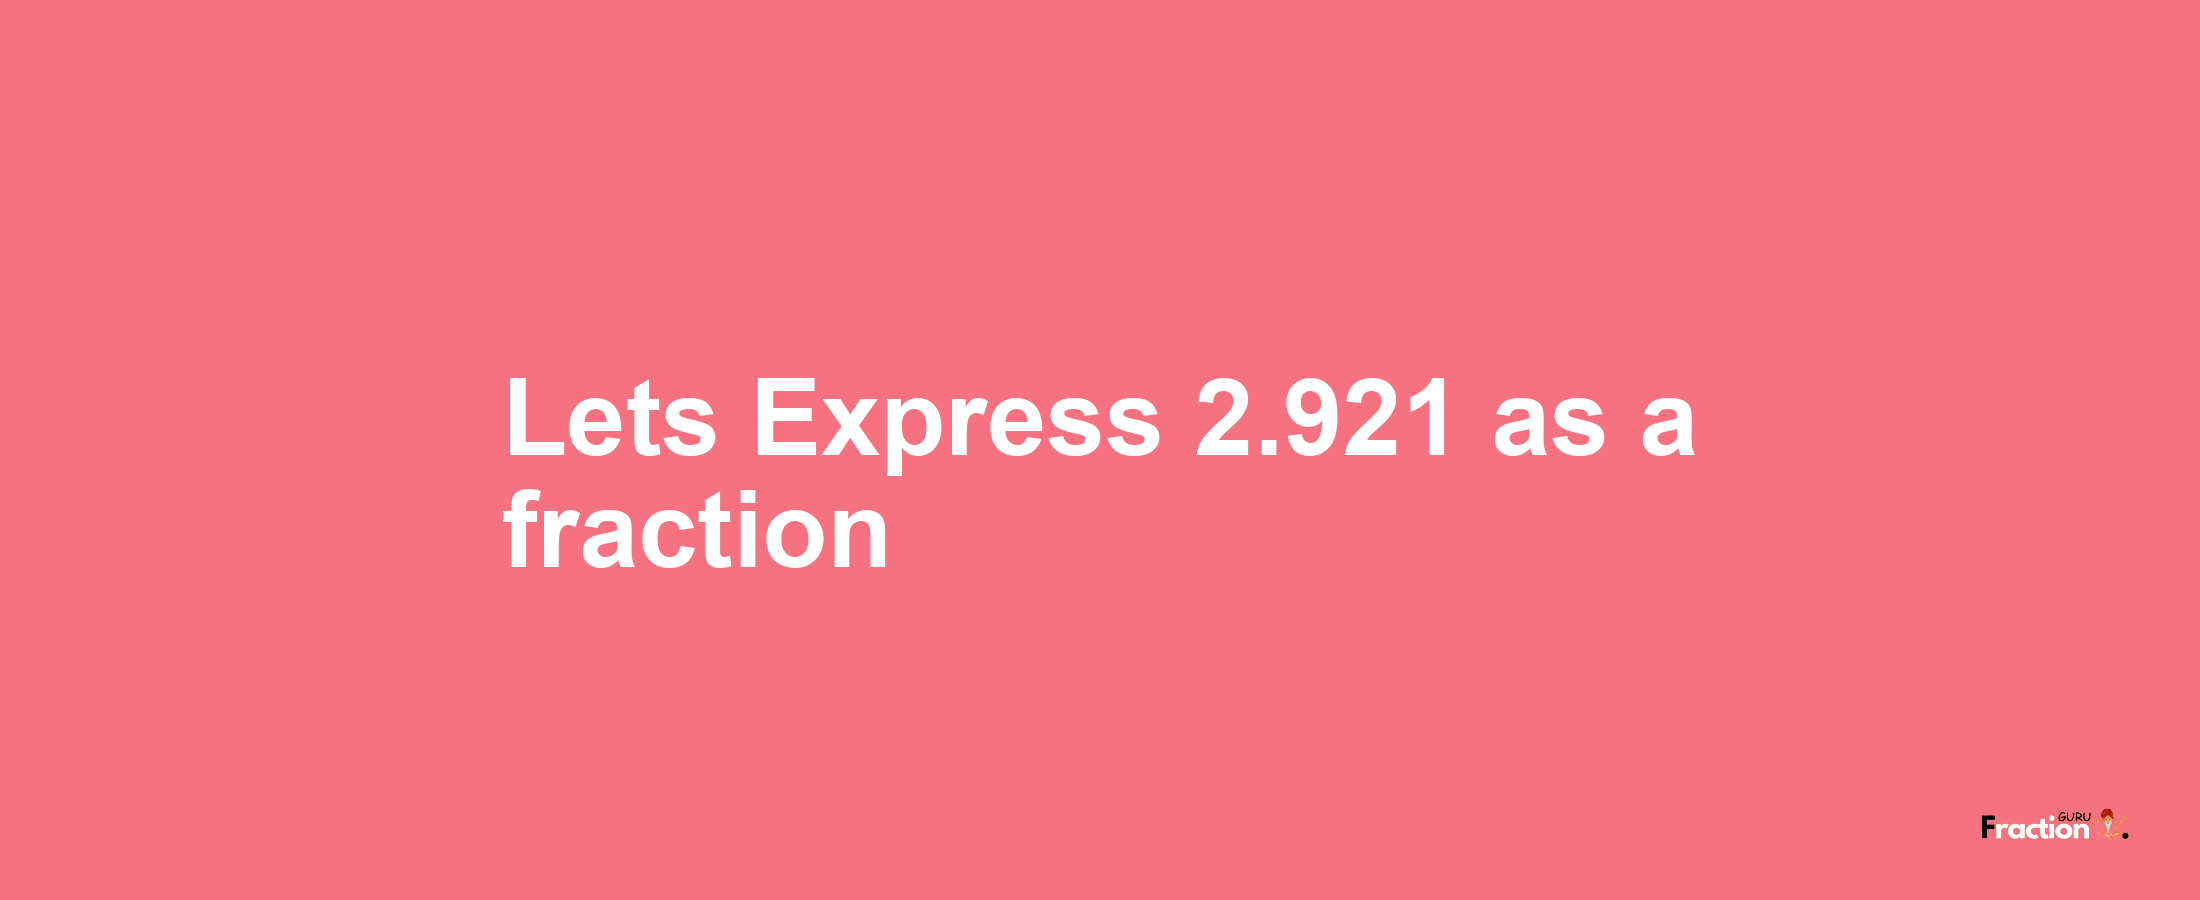 Lets Express 2.921 as afraction